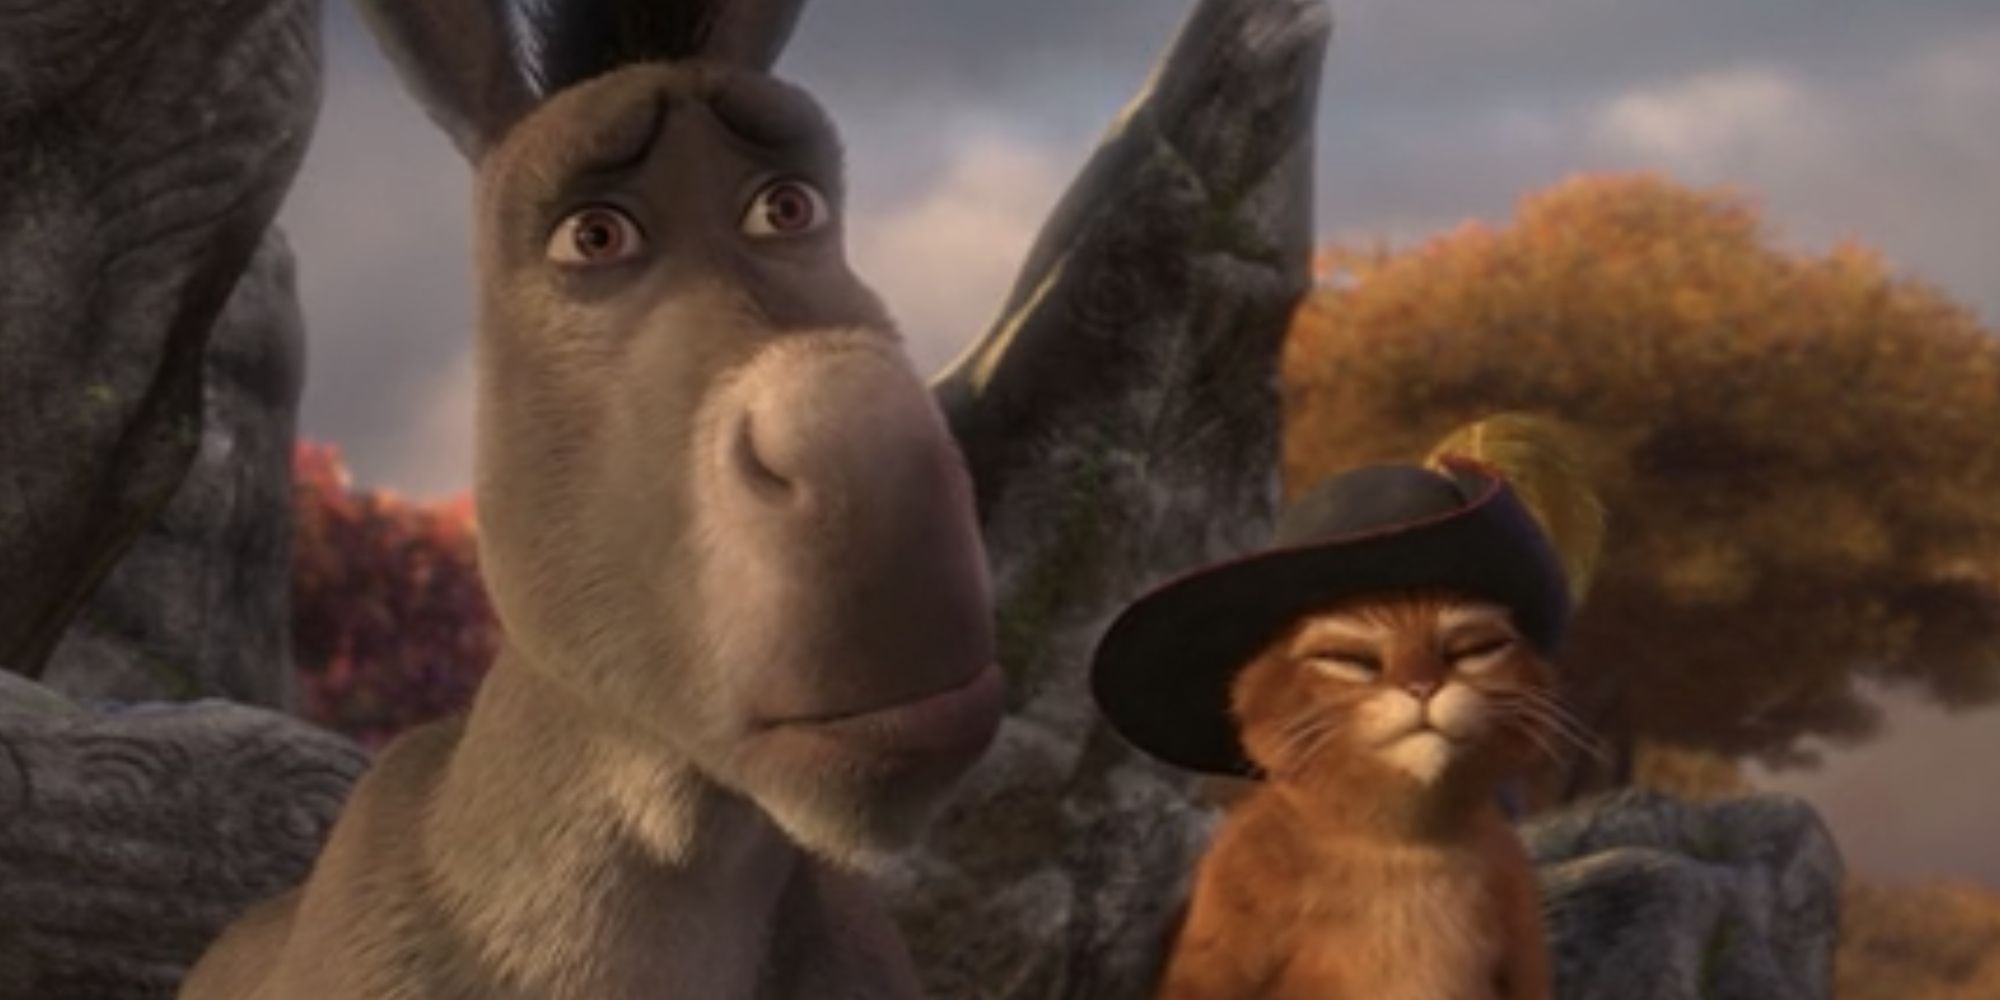 Shrek 3: Puss in Boots and Donkey hold hands as Merlin casts his spell